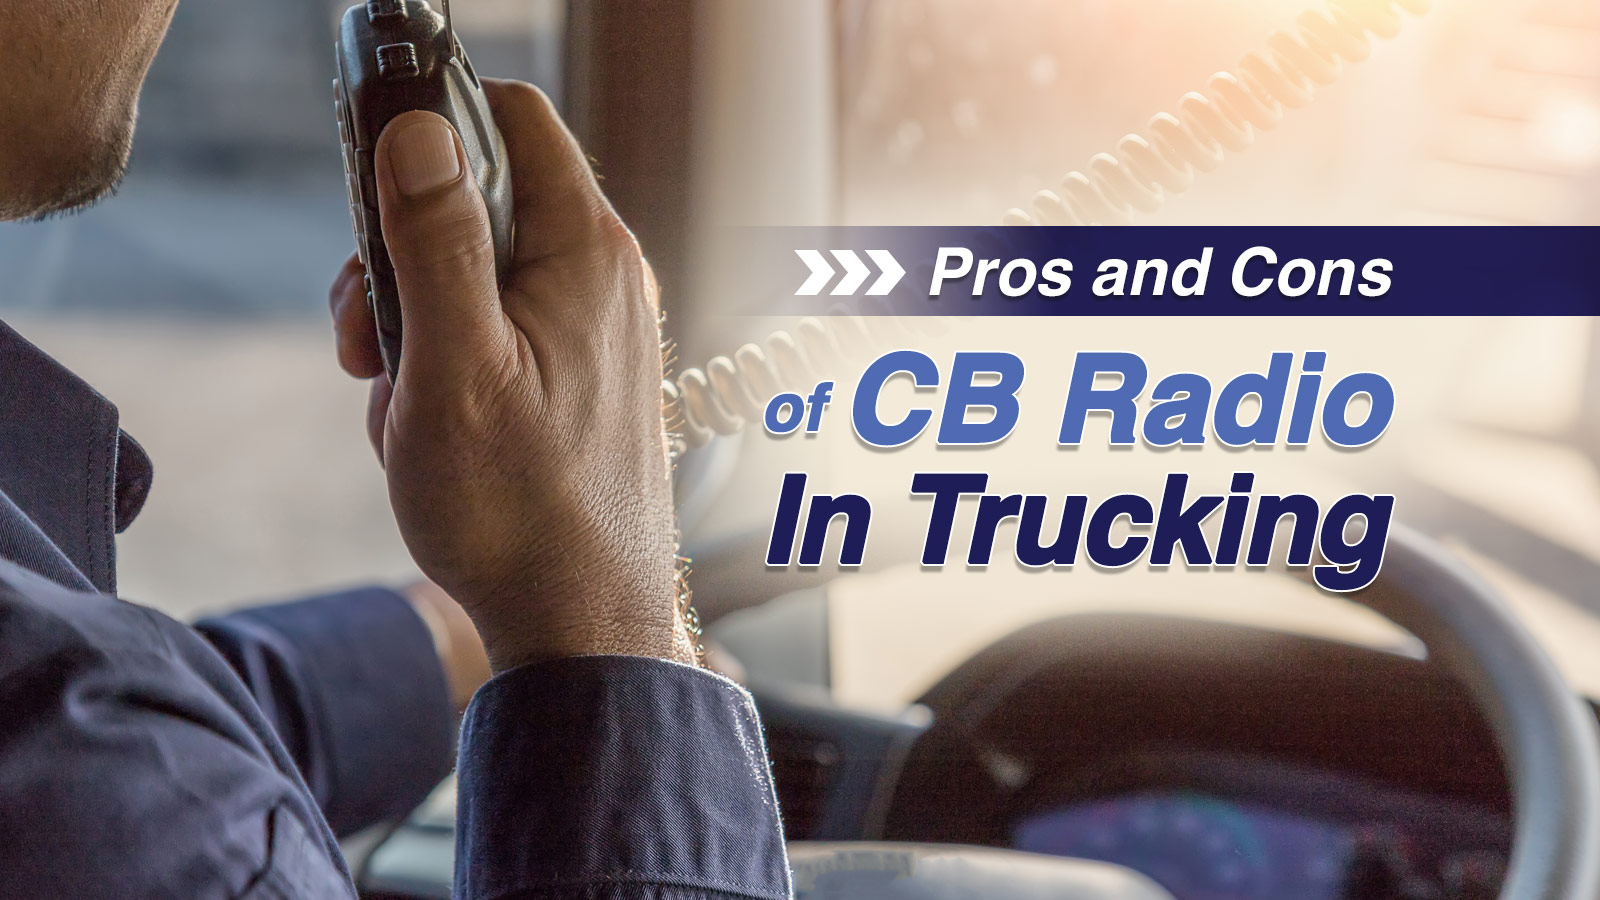 Pros and Cons of CB Radio in Trucking